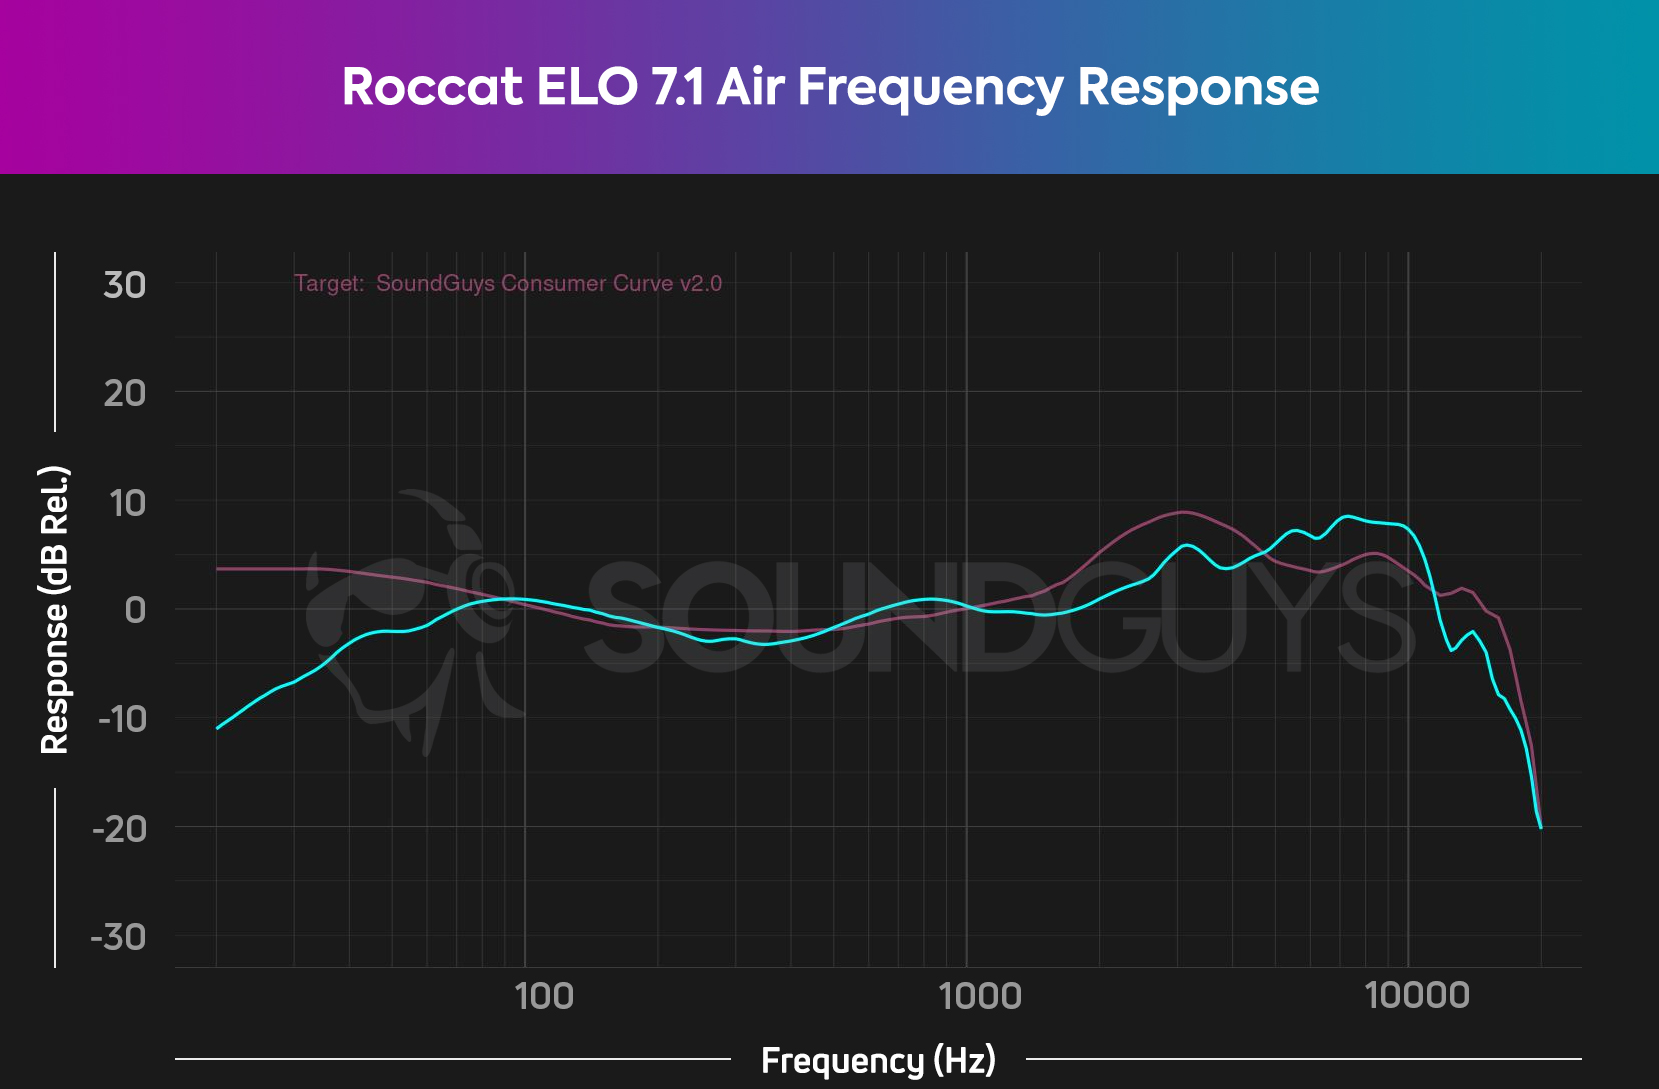 A frequency response chart for the ROccat ELO 7.1 Air gaming headset, which shows a lack of emphasis in the low end, but otherwise accurate audio